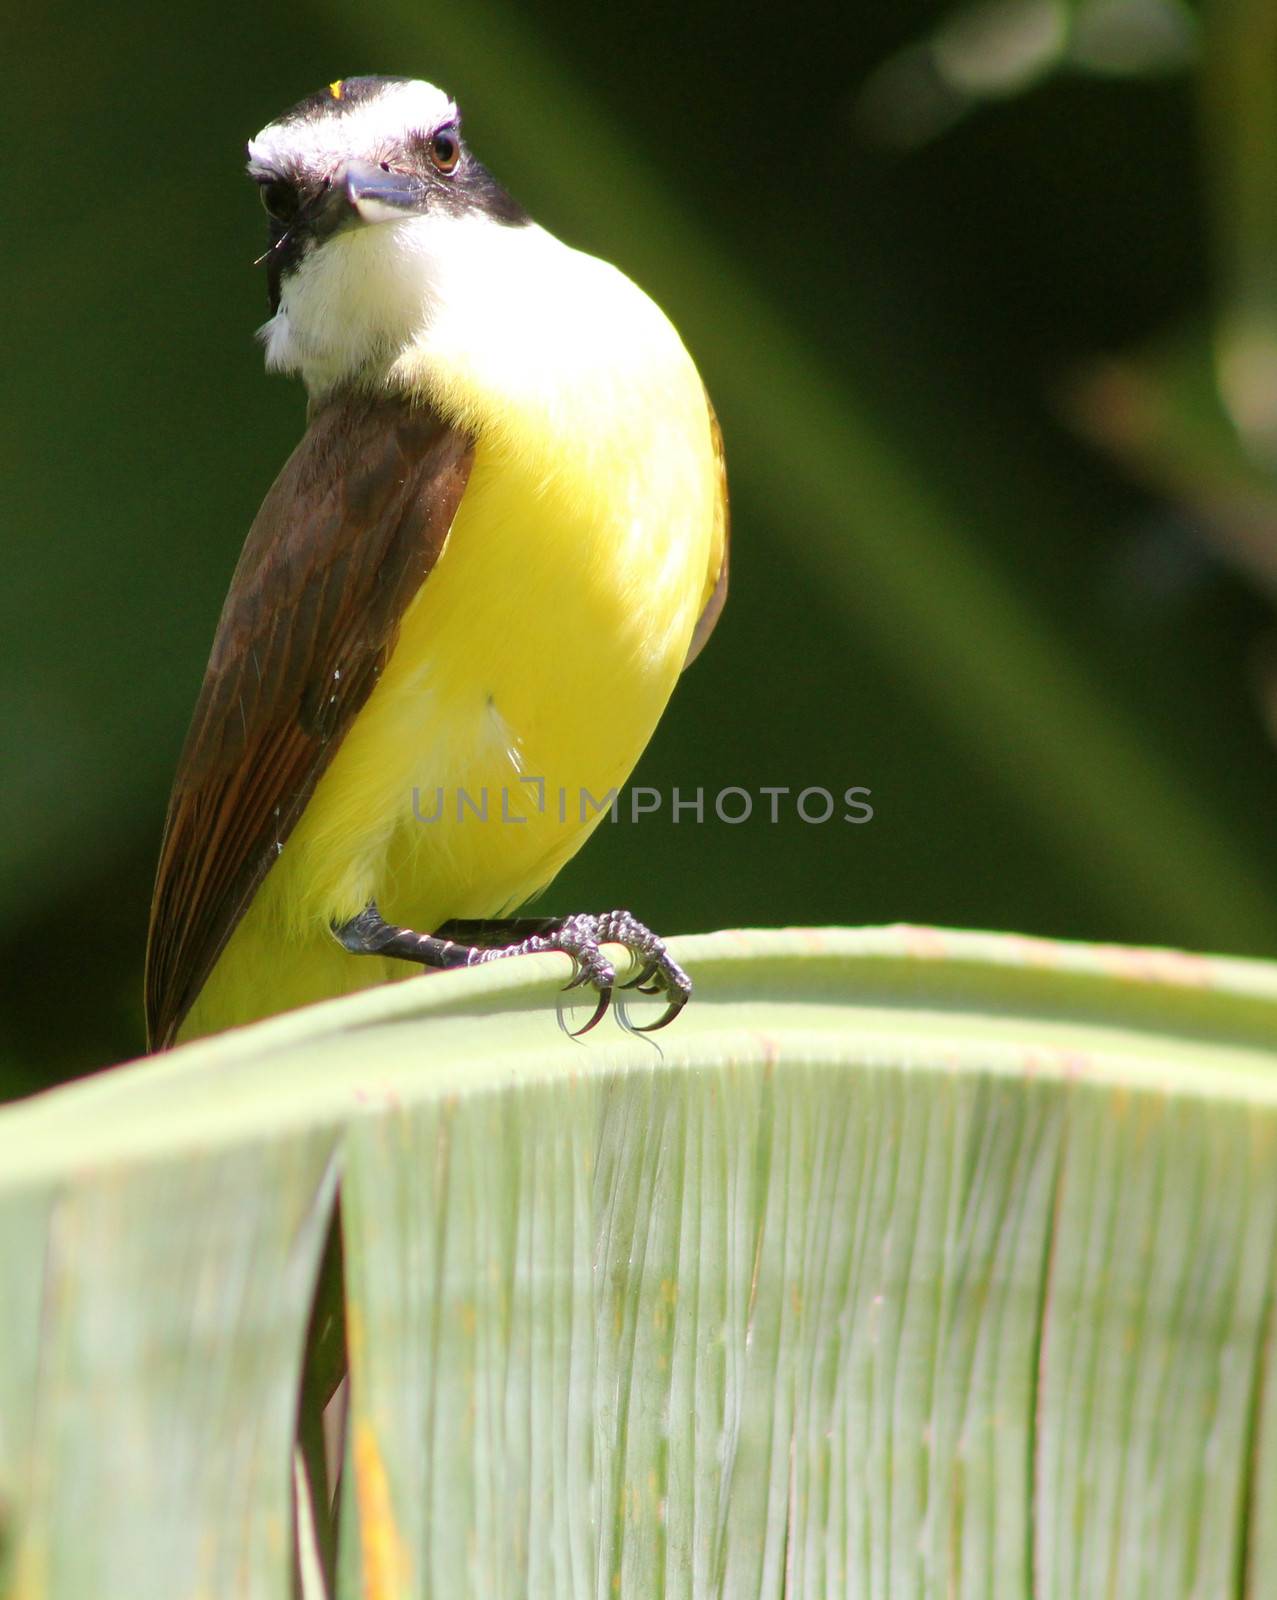 A colourful kiskadee perched in a palm tree in Mexico stares proudly.